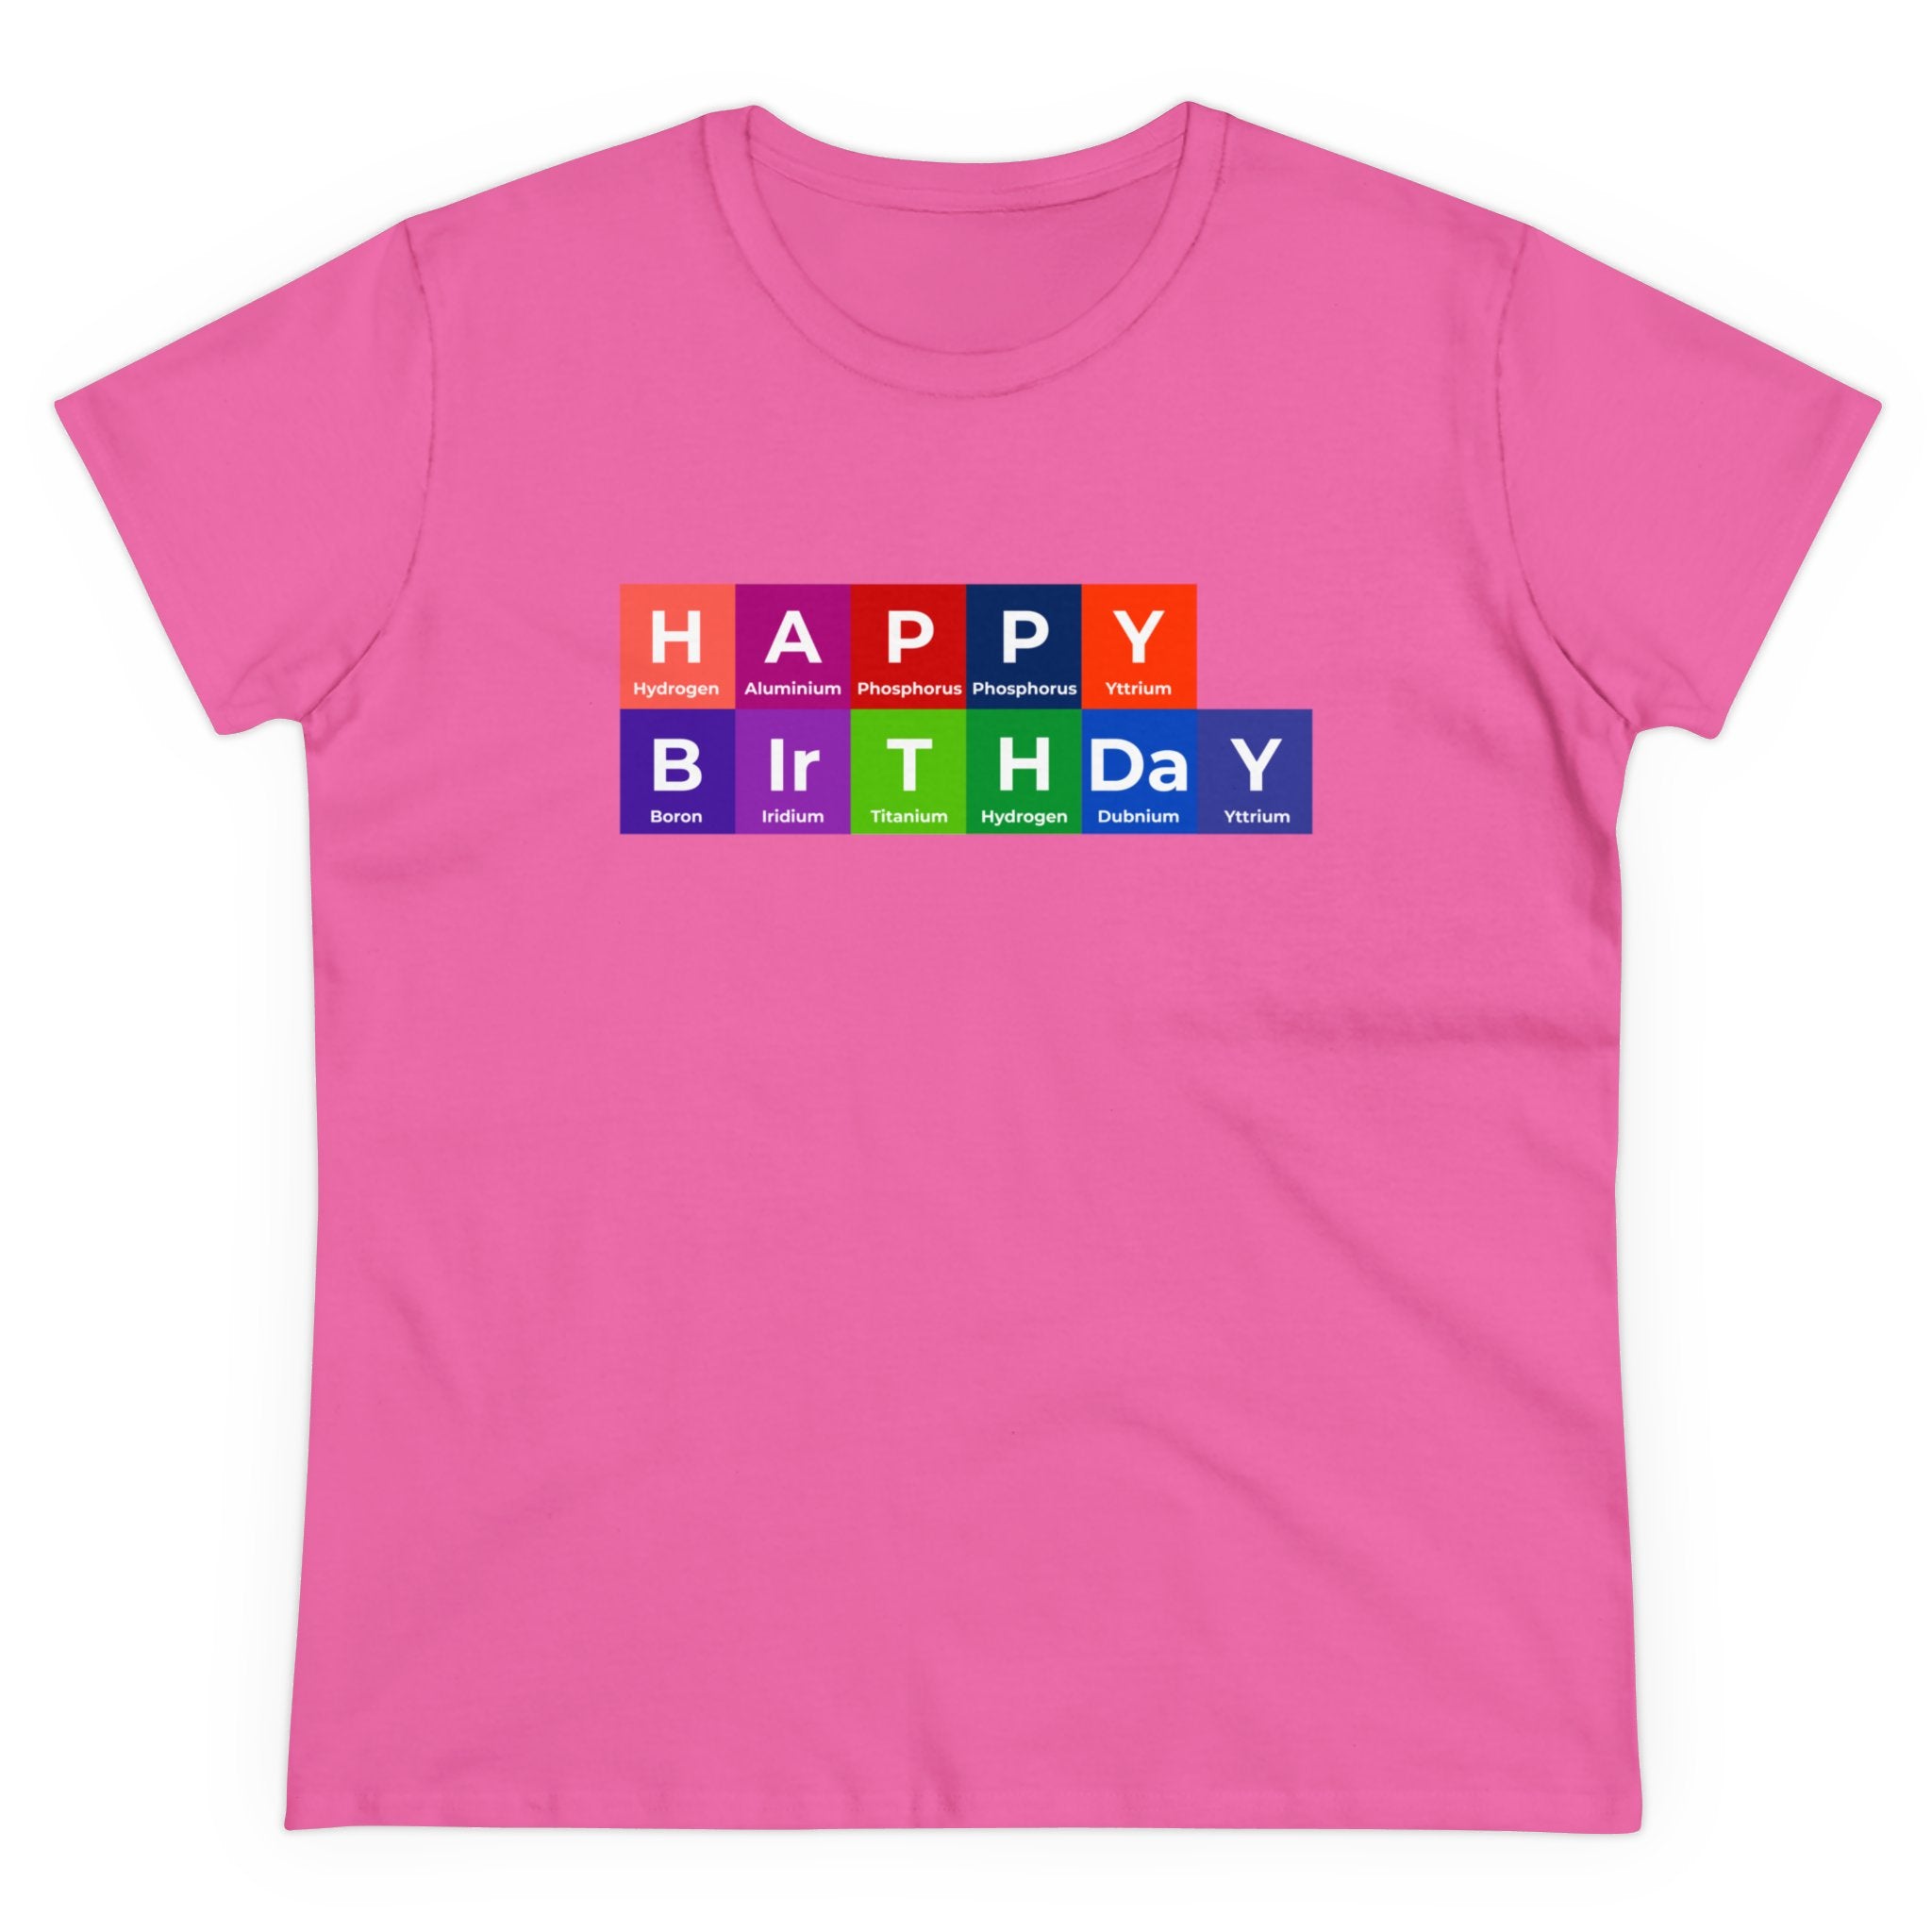 A pink Happy Birthday - Women's Tee with "Happy Birthday" spelled out using colorful periodic table elements, perfect for comfort and festivity.